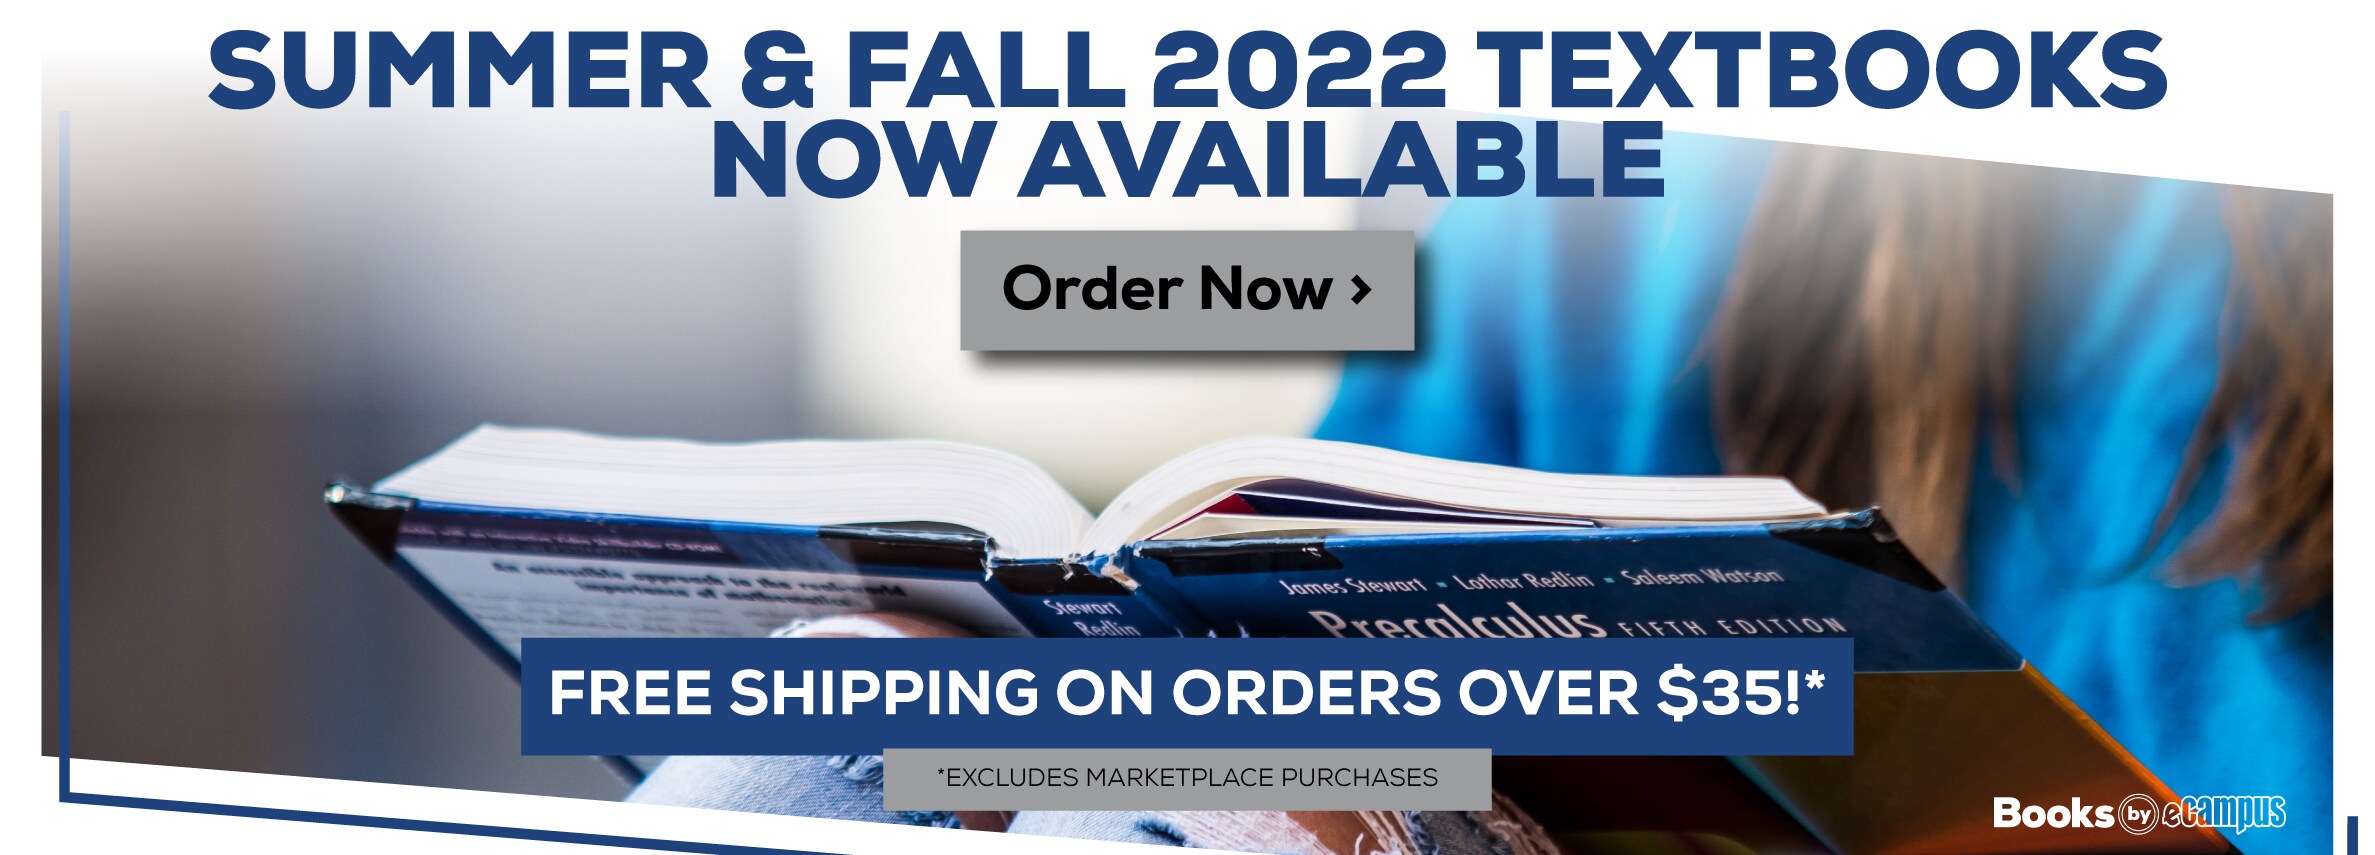 Summer & Fall 2022 Textbooks Now Available. Free shipping on all orders over $35! Excludes marketplace purchases. Order Now.